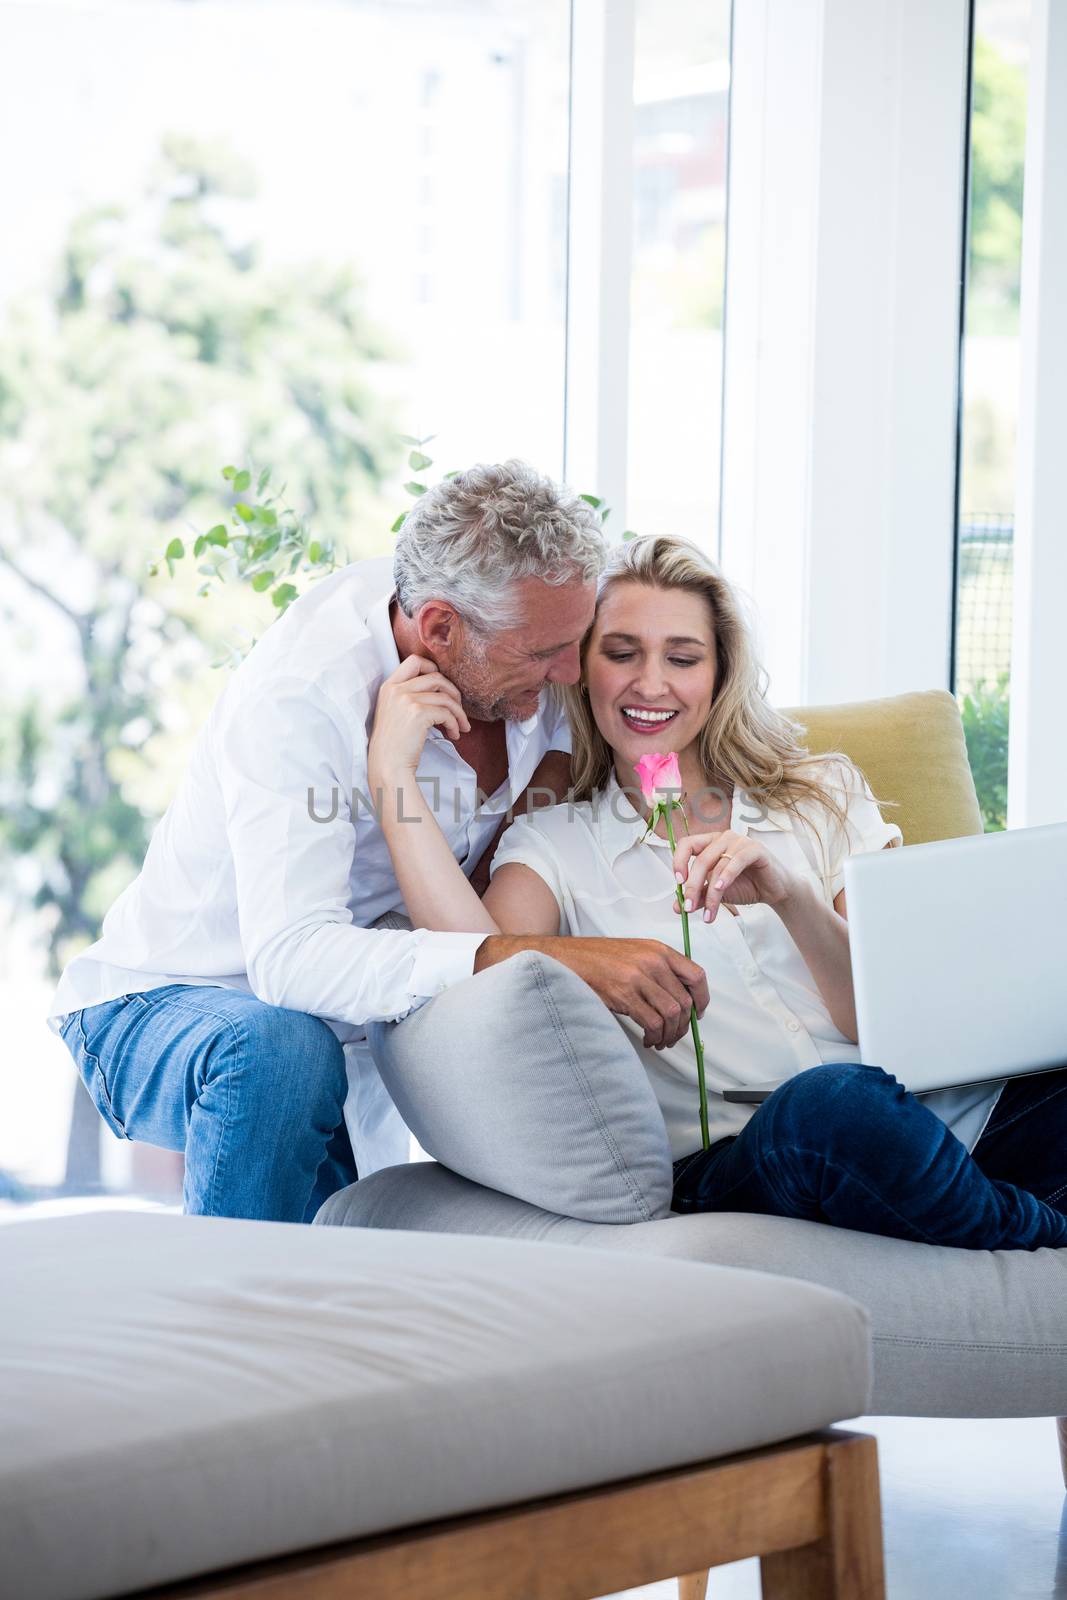 Romantic smiling mature couple with rose at home